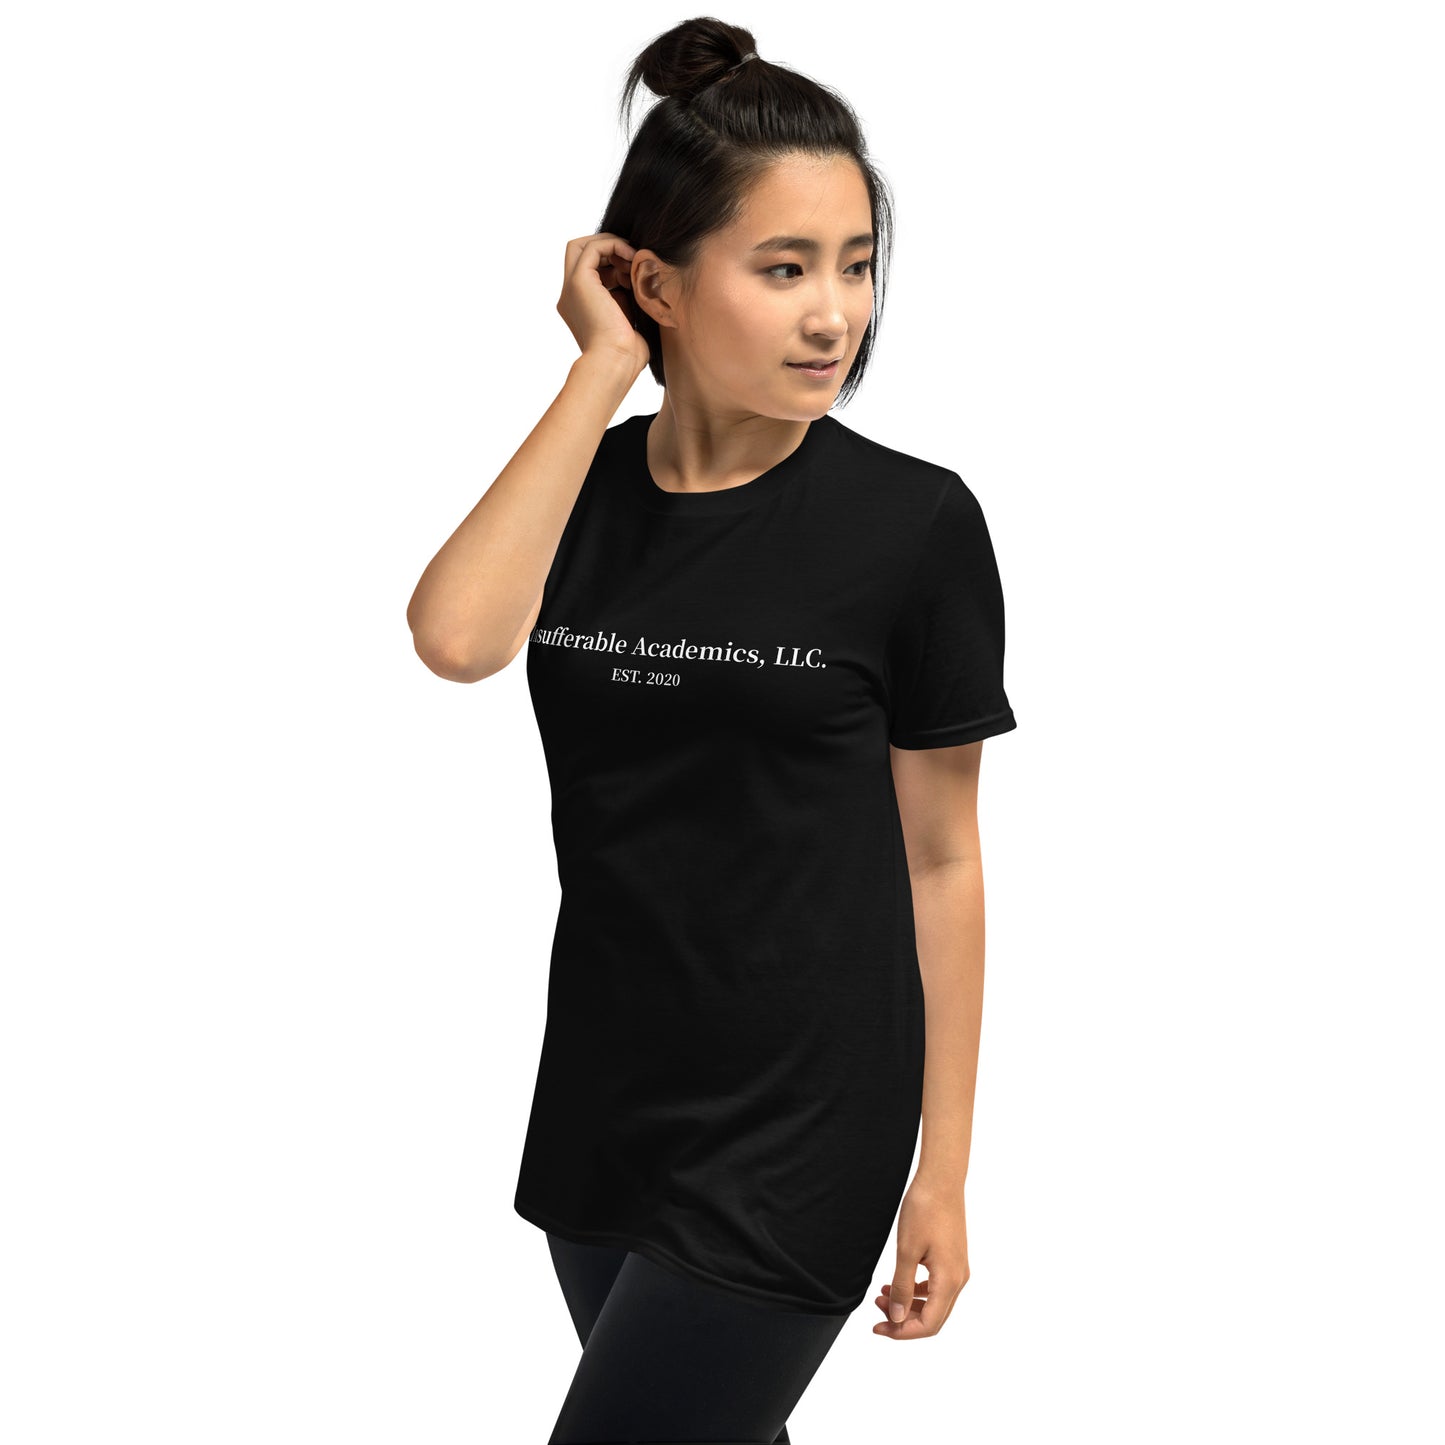 "The Vintage Tee" by Insufferable Academics LLC (Black)